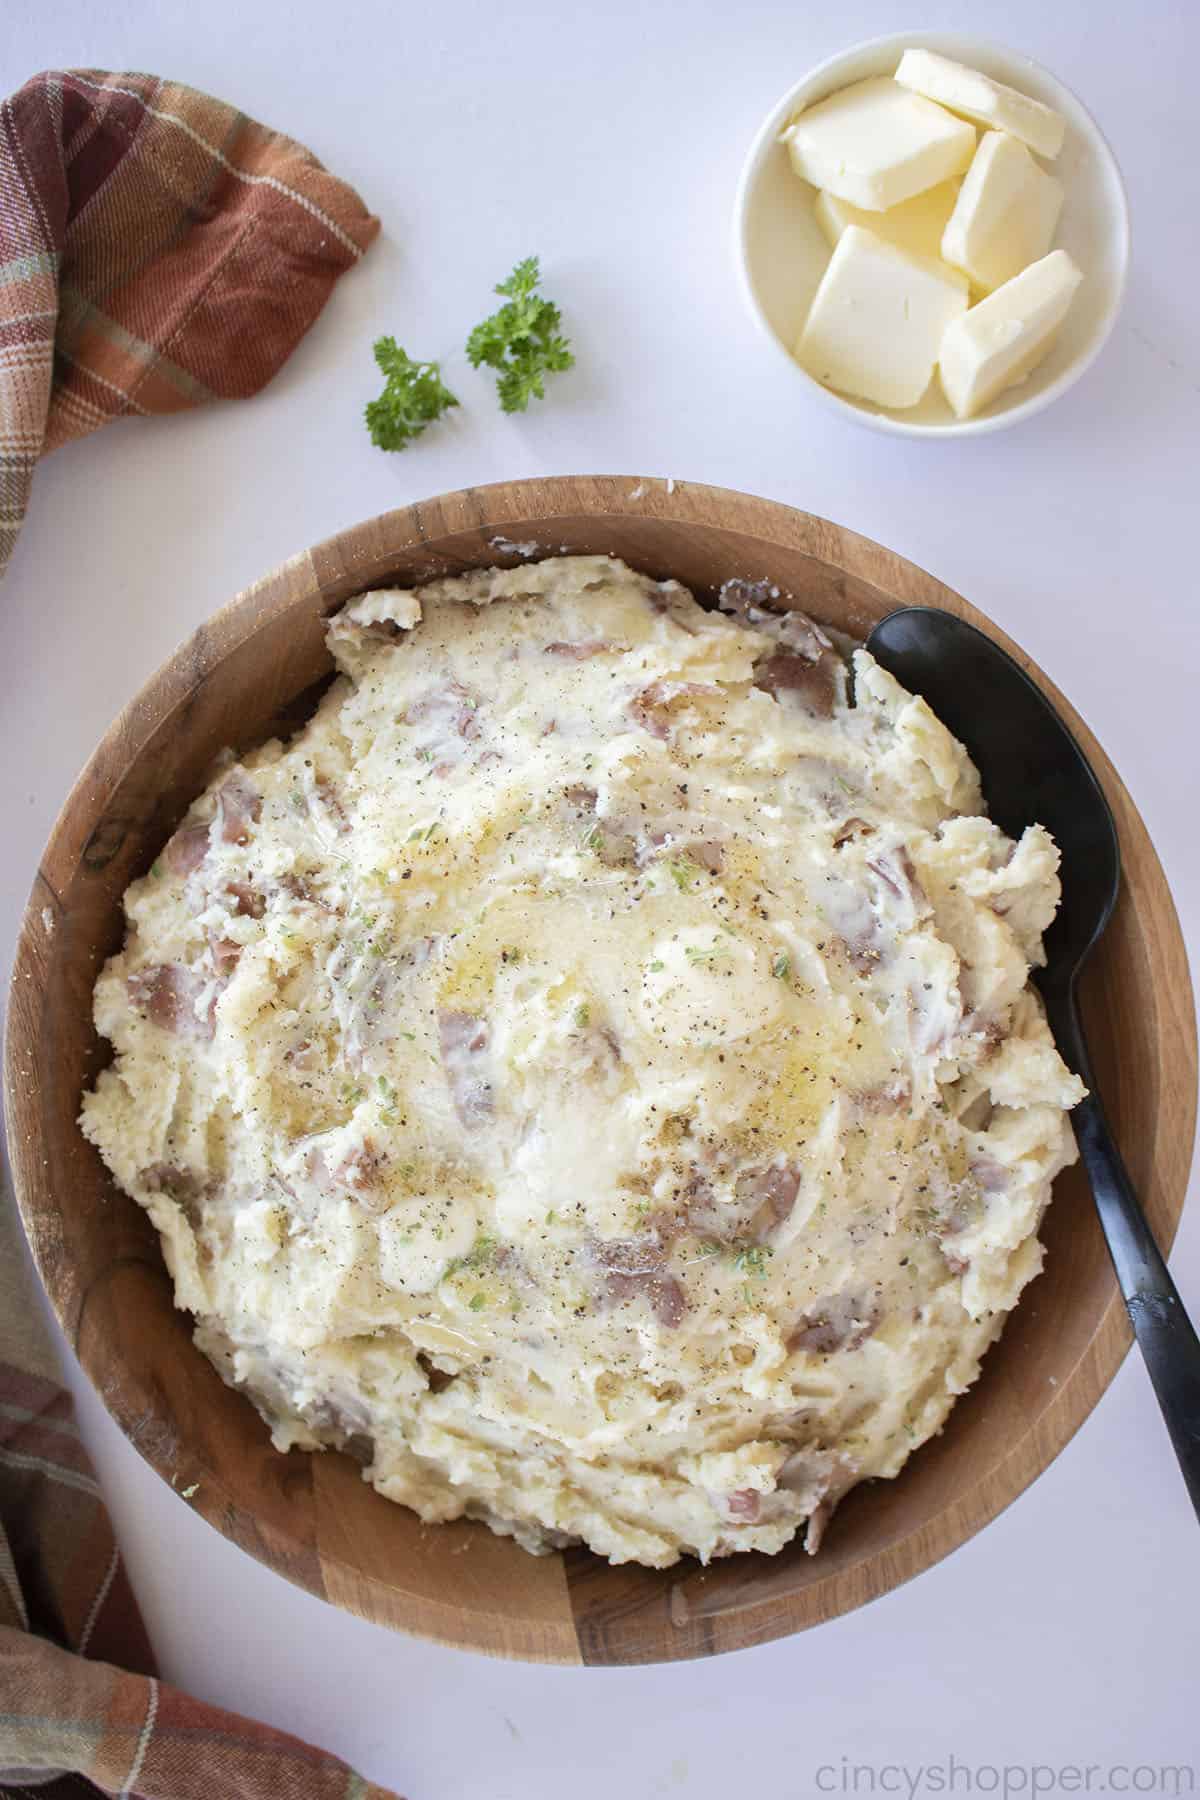 Red Skin MAshed Potatoes in a brown bowl.